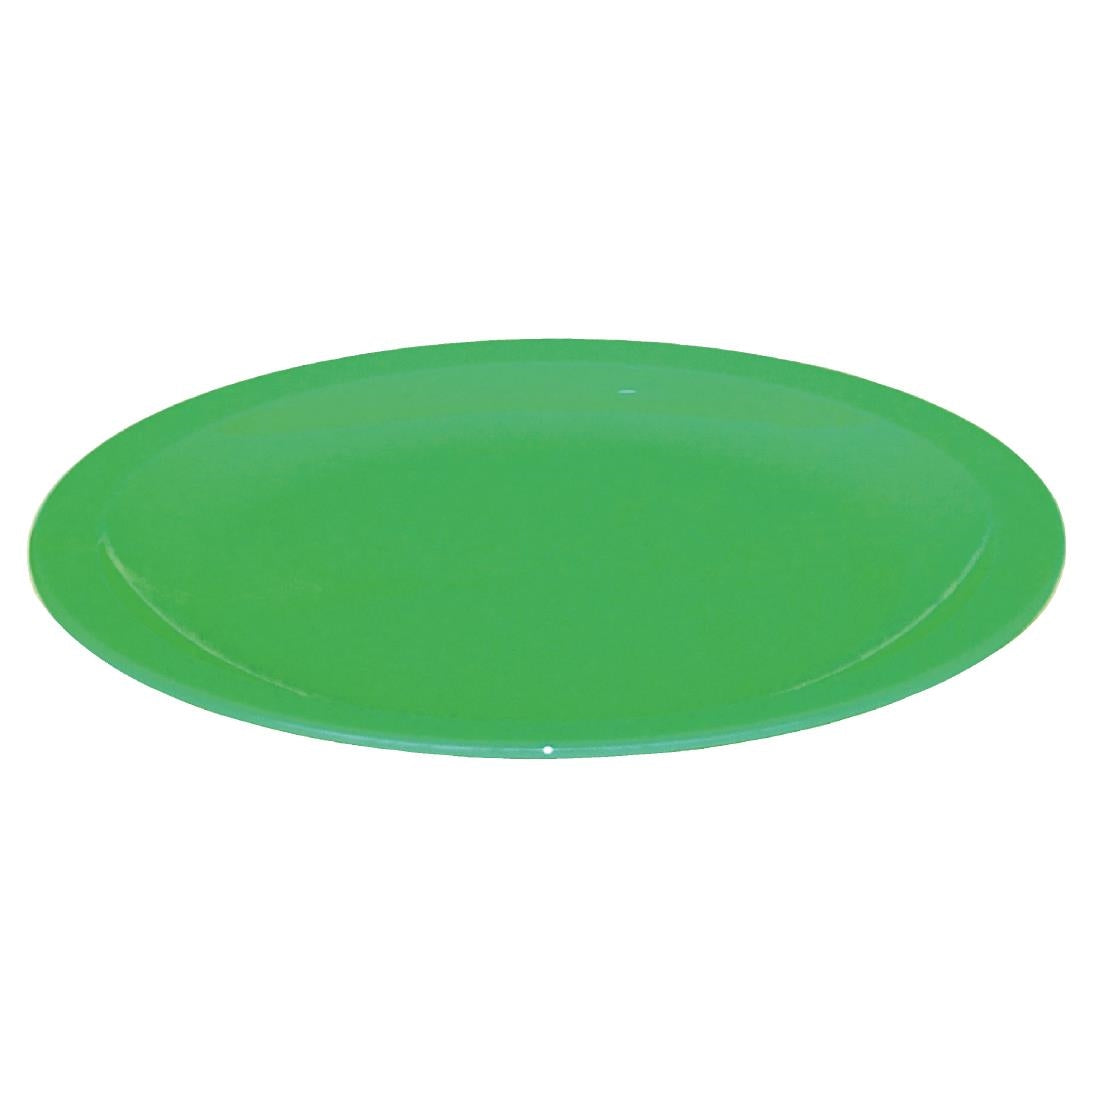 CB768 Olympia Kristallon Polycarbonate Plates Green 230mm (Pack of 12)